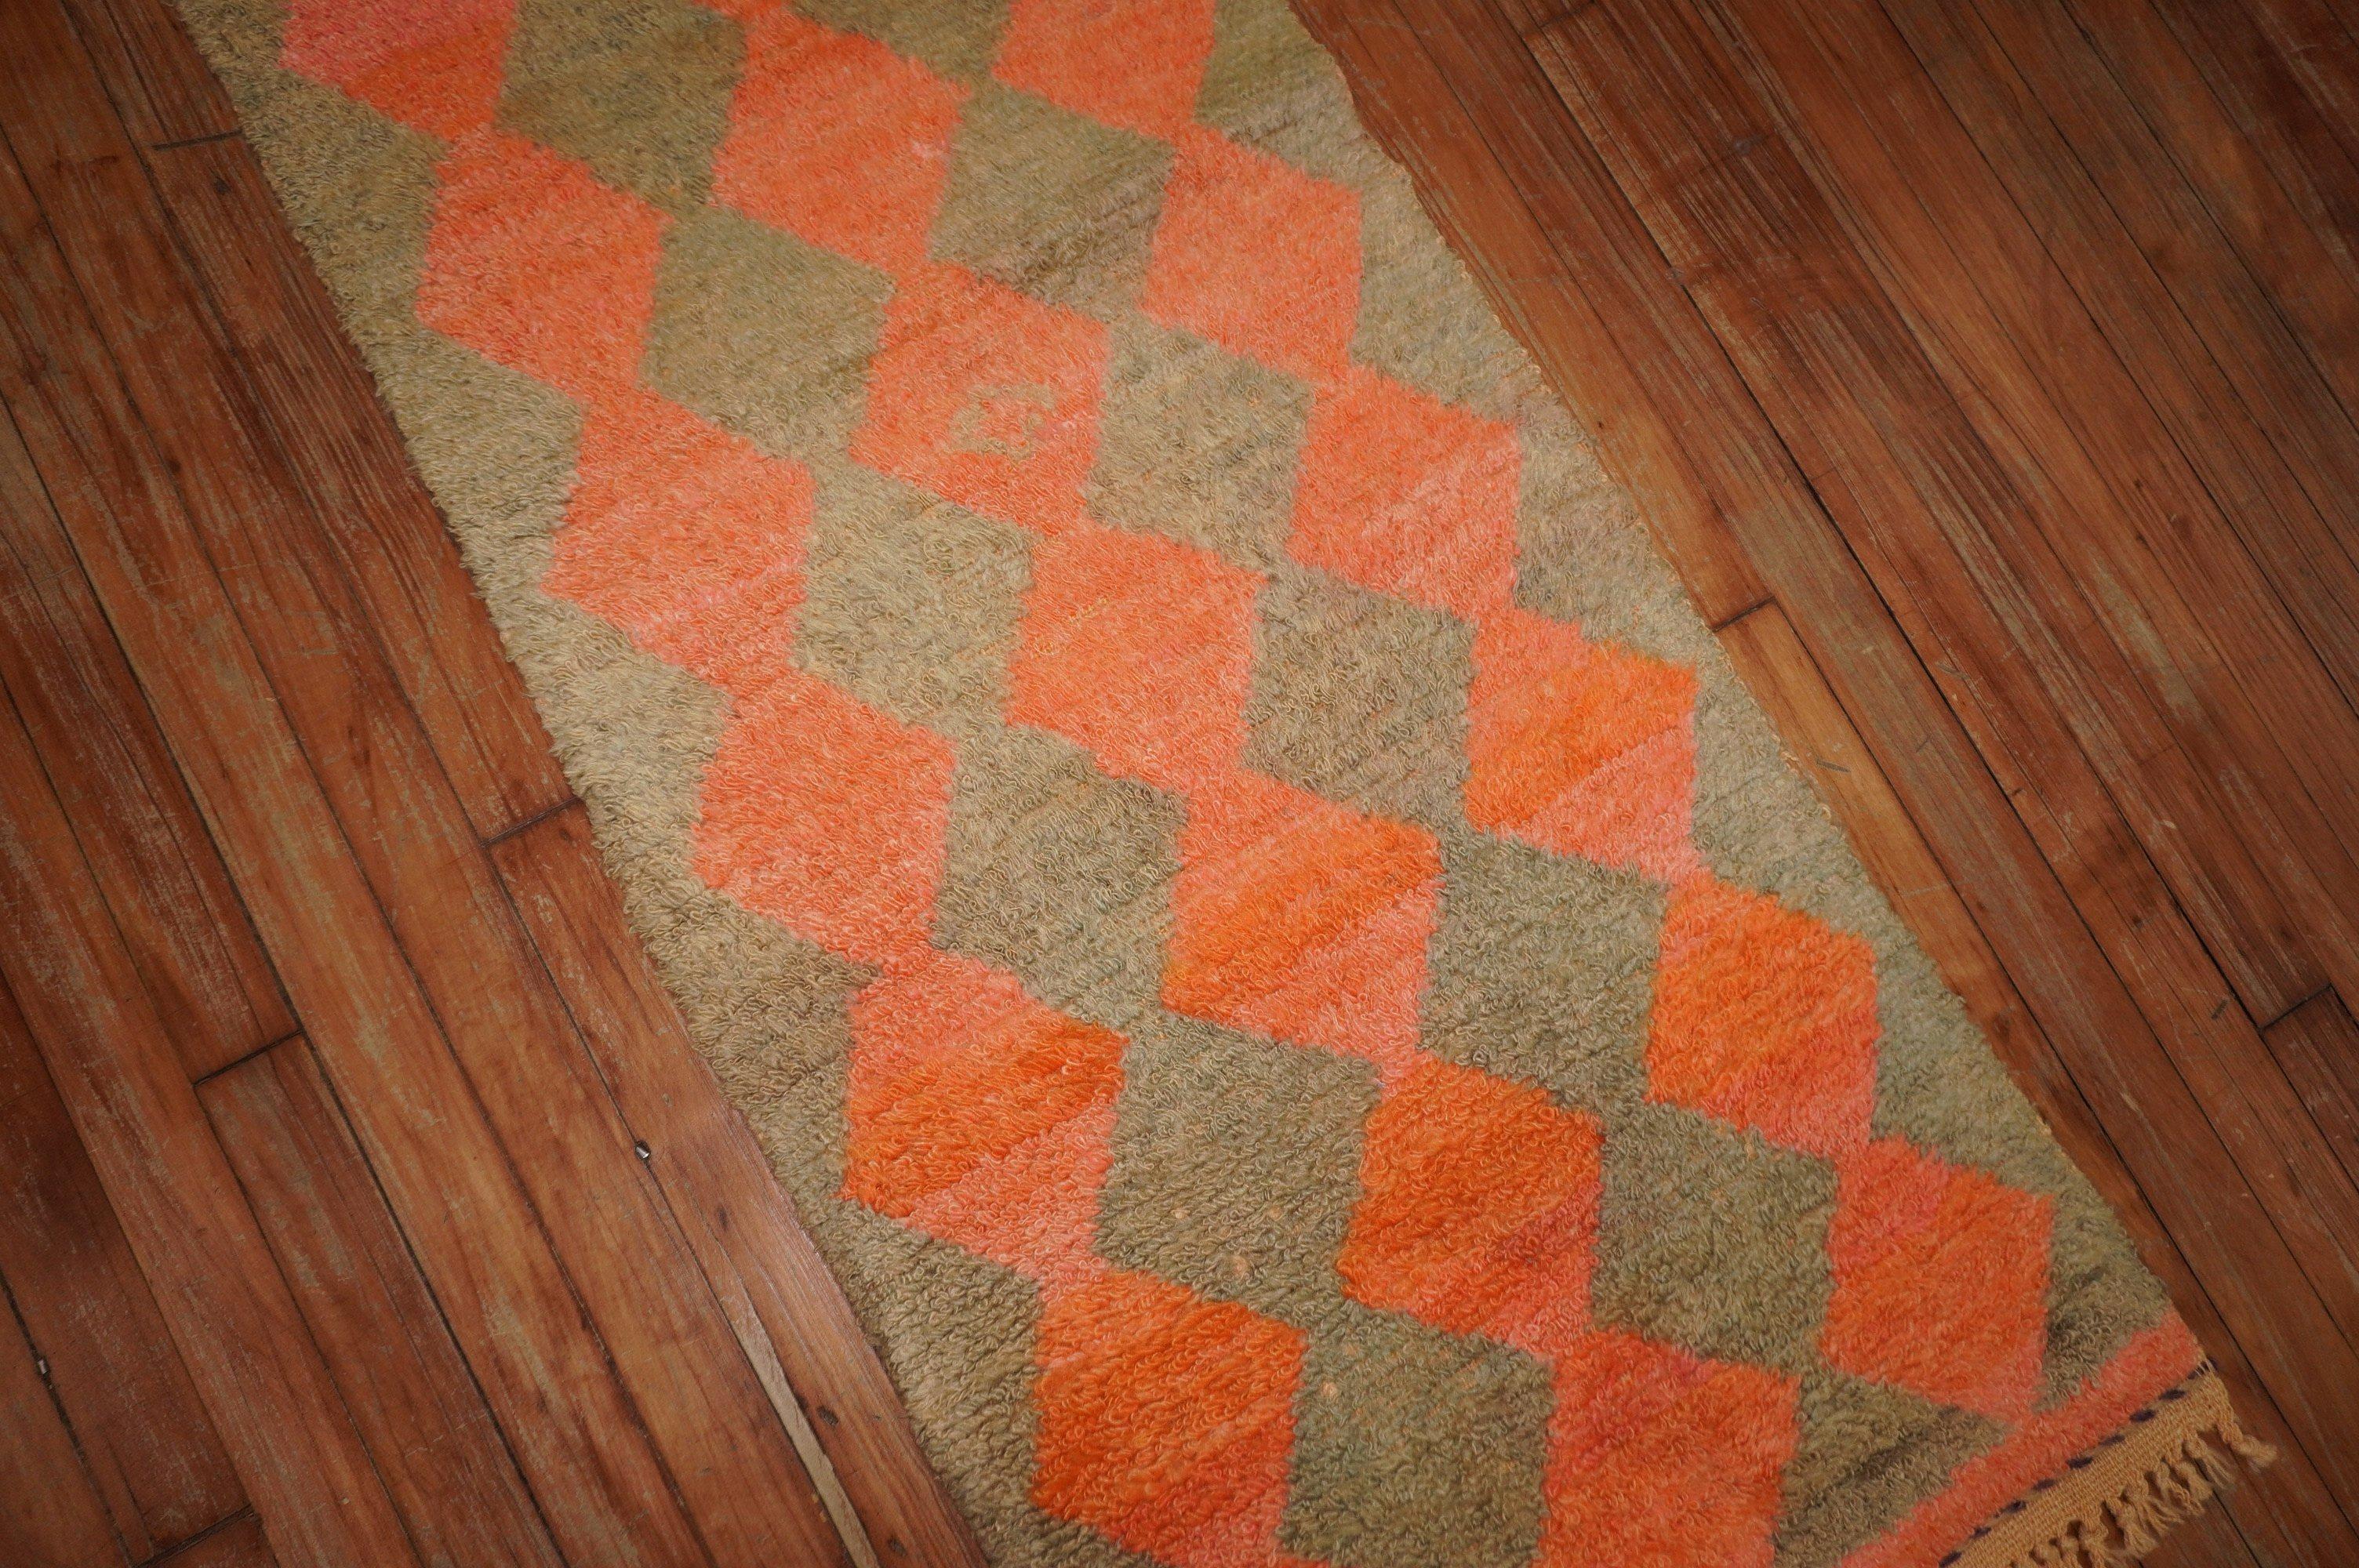 2 tone one of a kind handmade mid-20th century Turkish Runner in gray and orange sherbert tones. A boho treat. Probably best for an empty narrow hallway that needs a new soul

Measures: 1'11